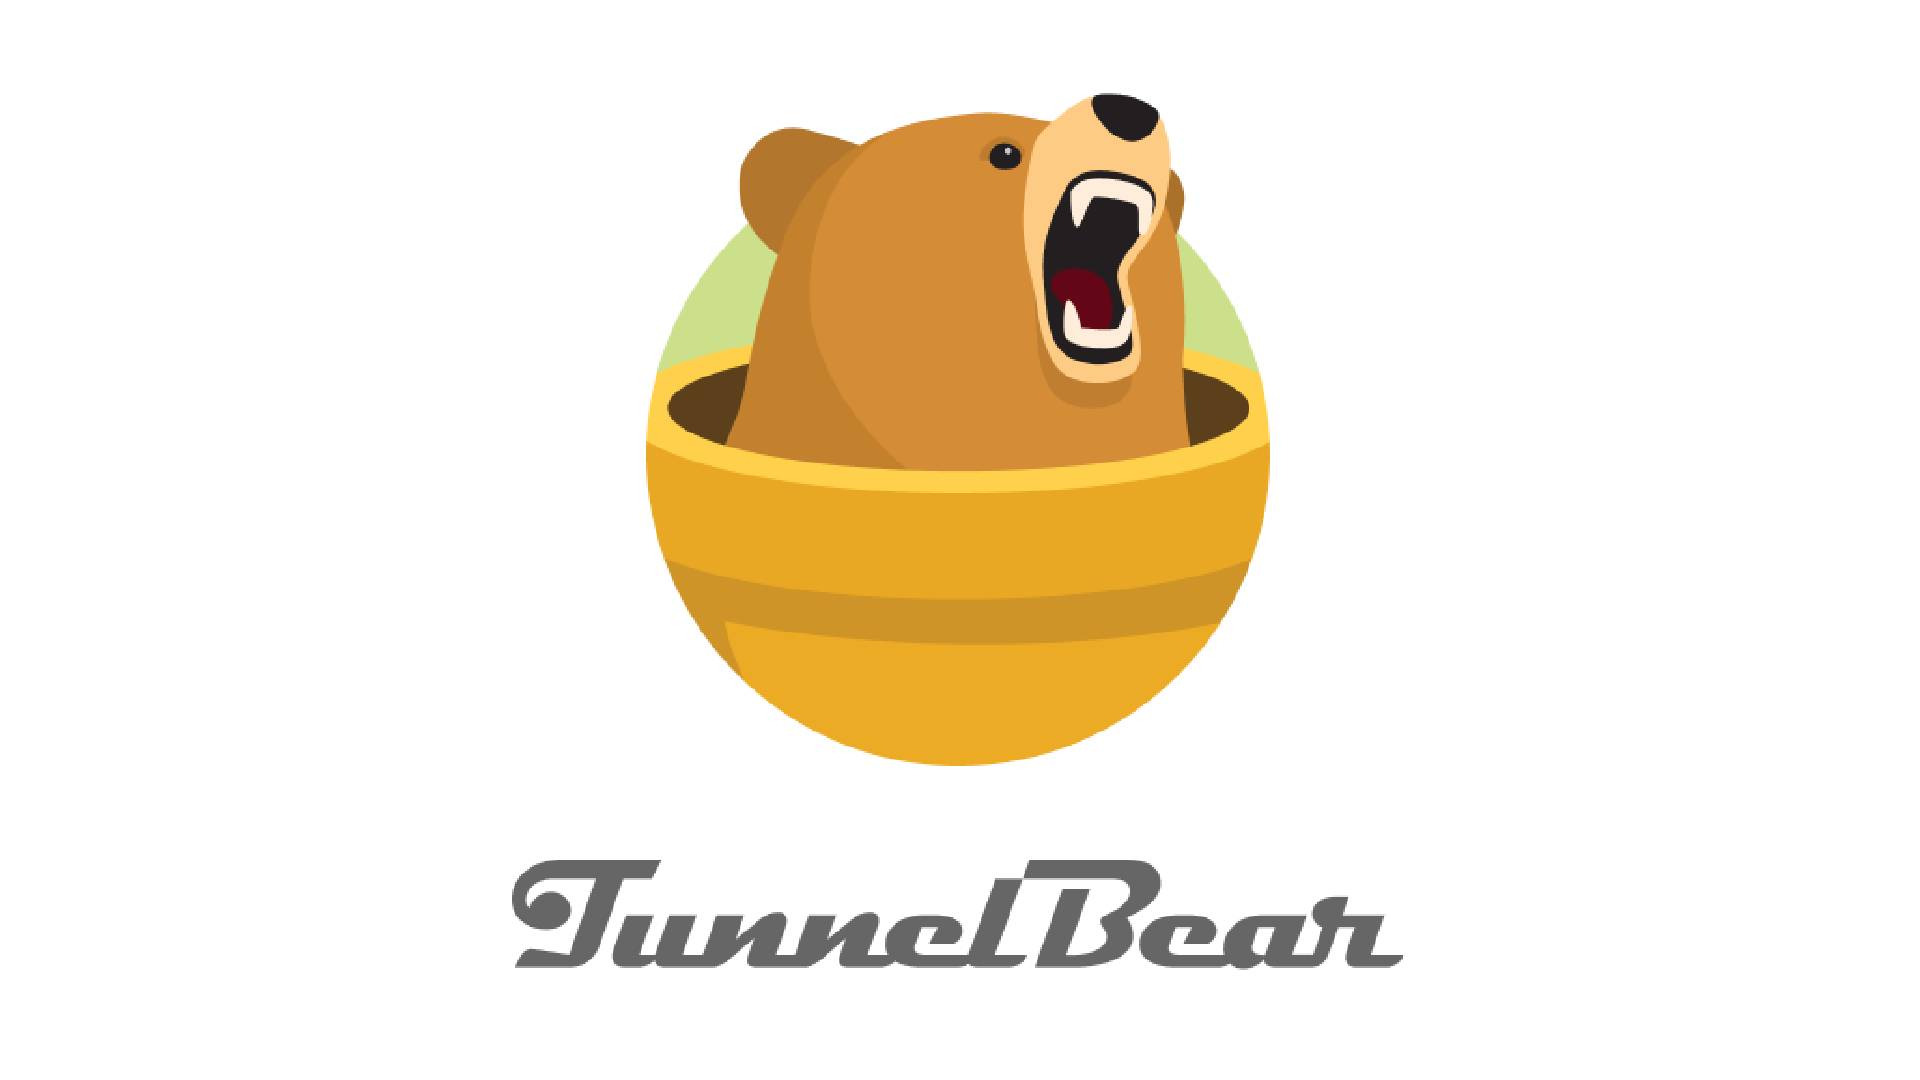 Best VPN in the US: TunnelBear.  The image shows the company logo.